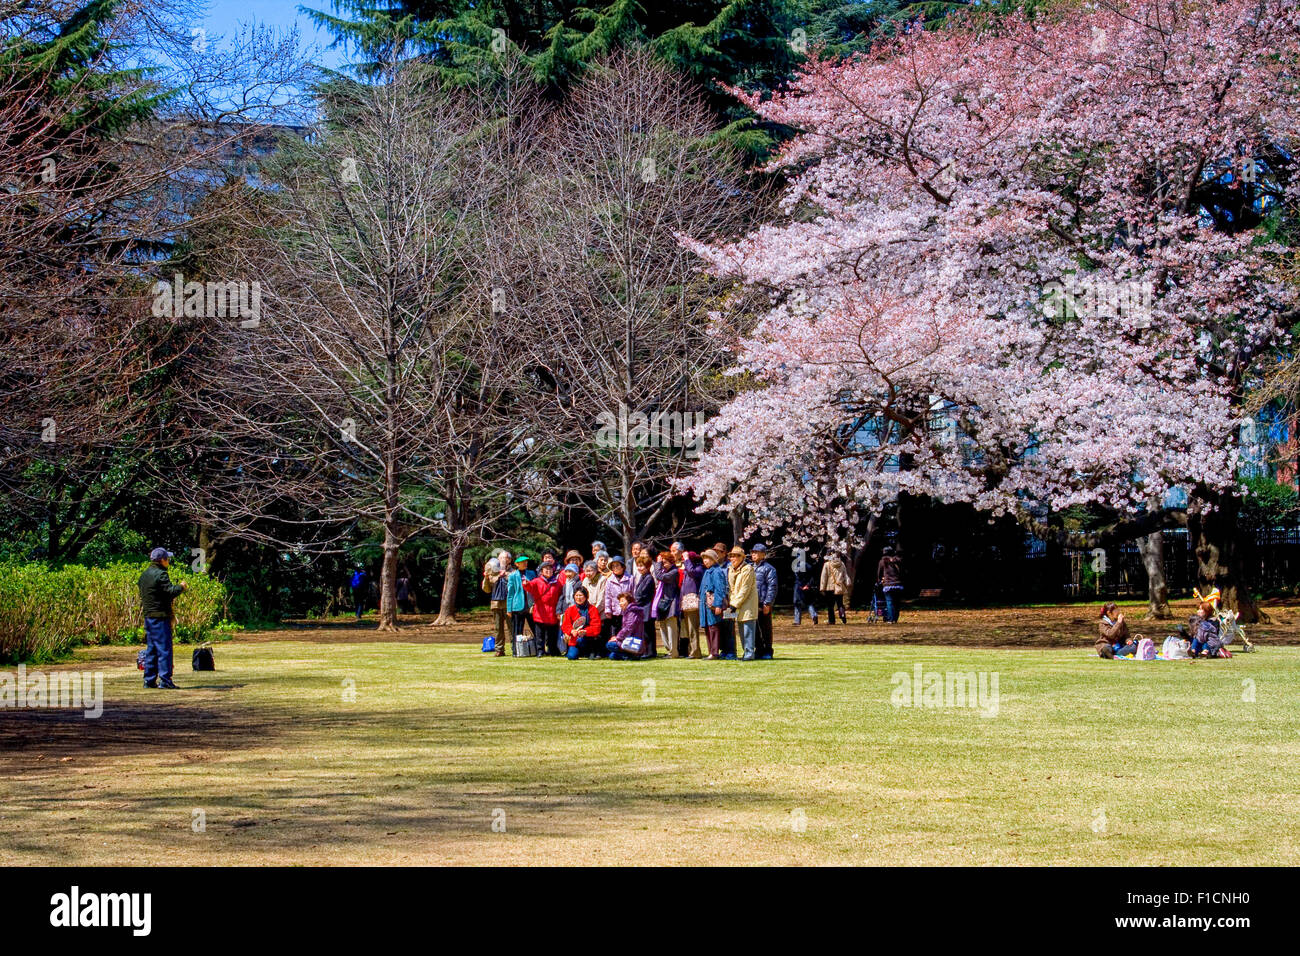 Photographer making a photo of people standing under a blossoming cherry tree during cherry blossom time Stock Photo